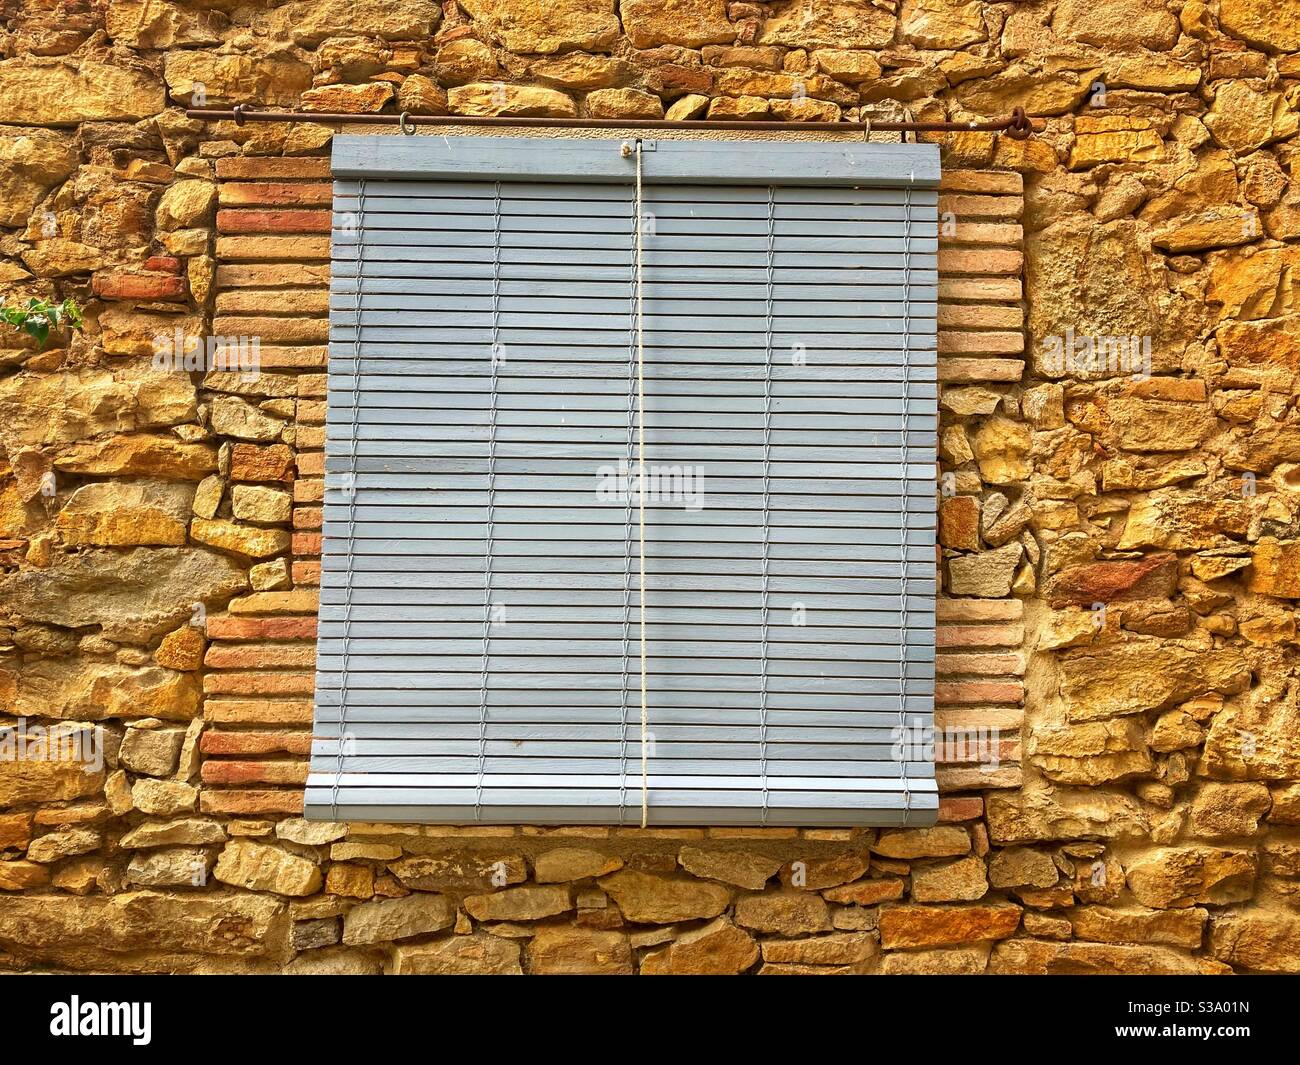 Closed blind in the medieval village of Peratallada, located in the middle of the Emporda region of Girona, Catalonia, Spain Stock Photo